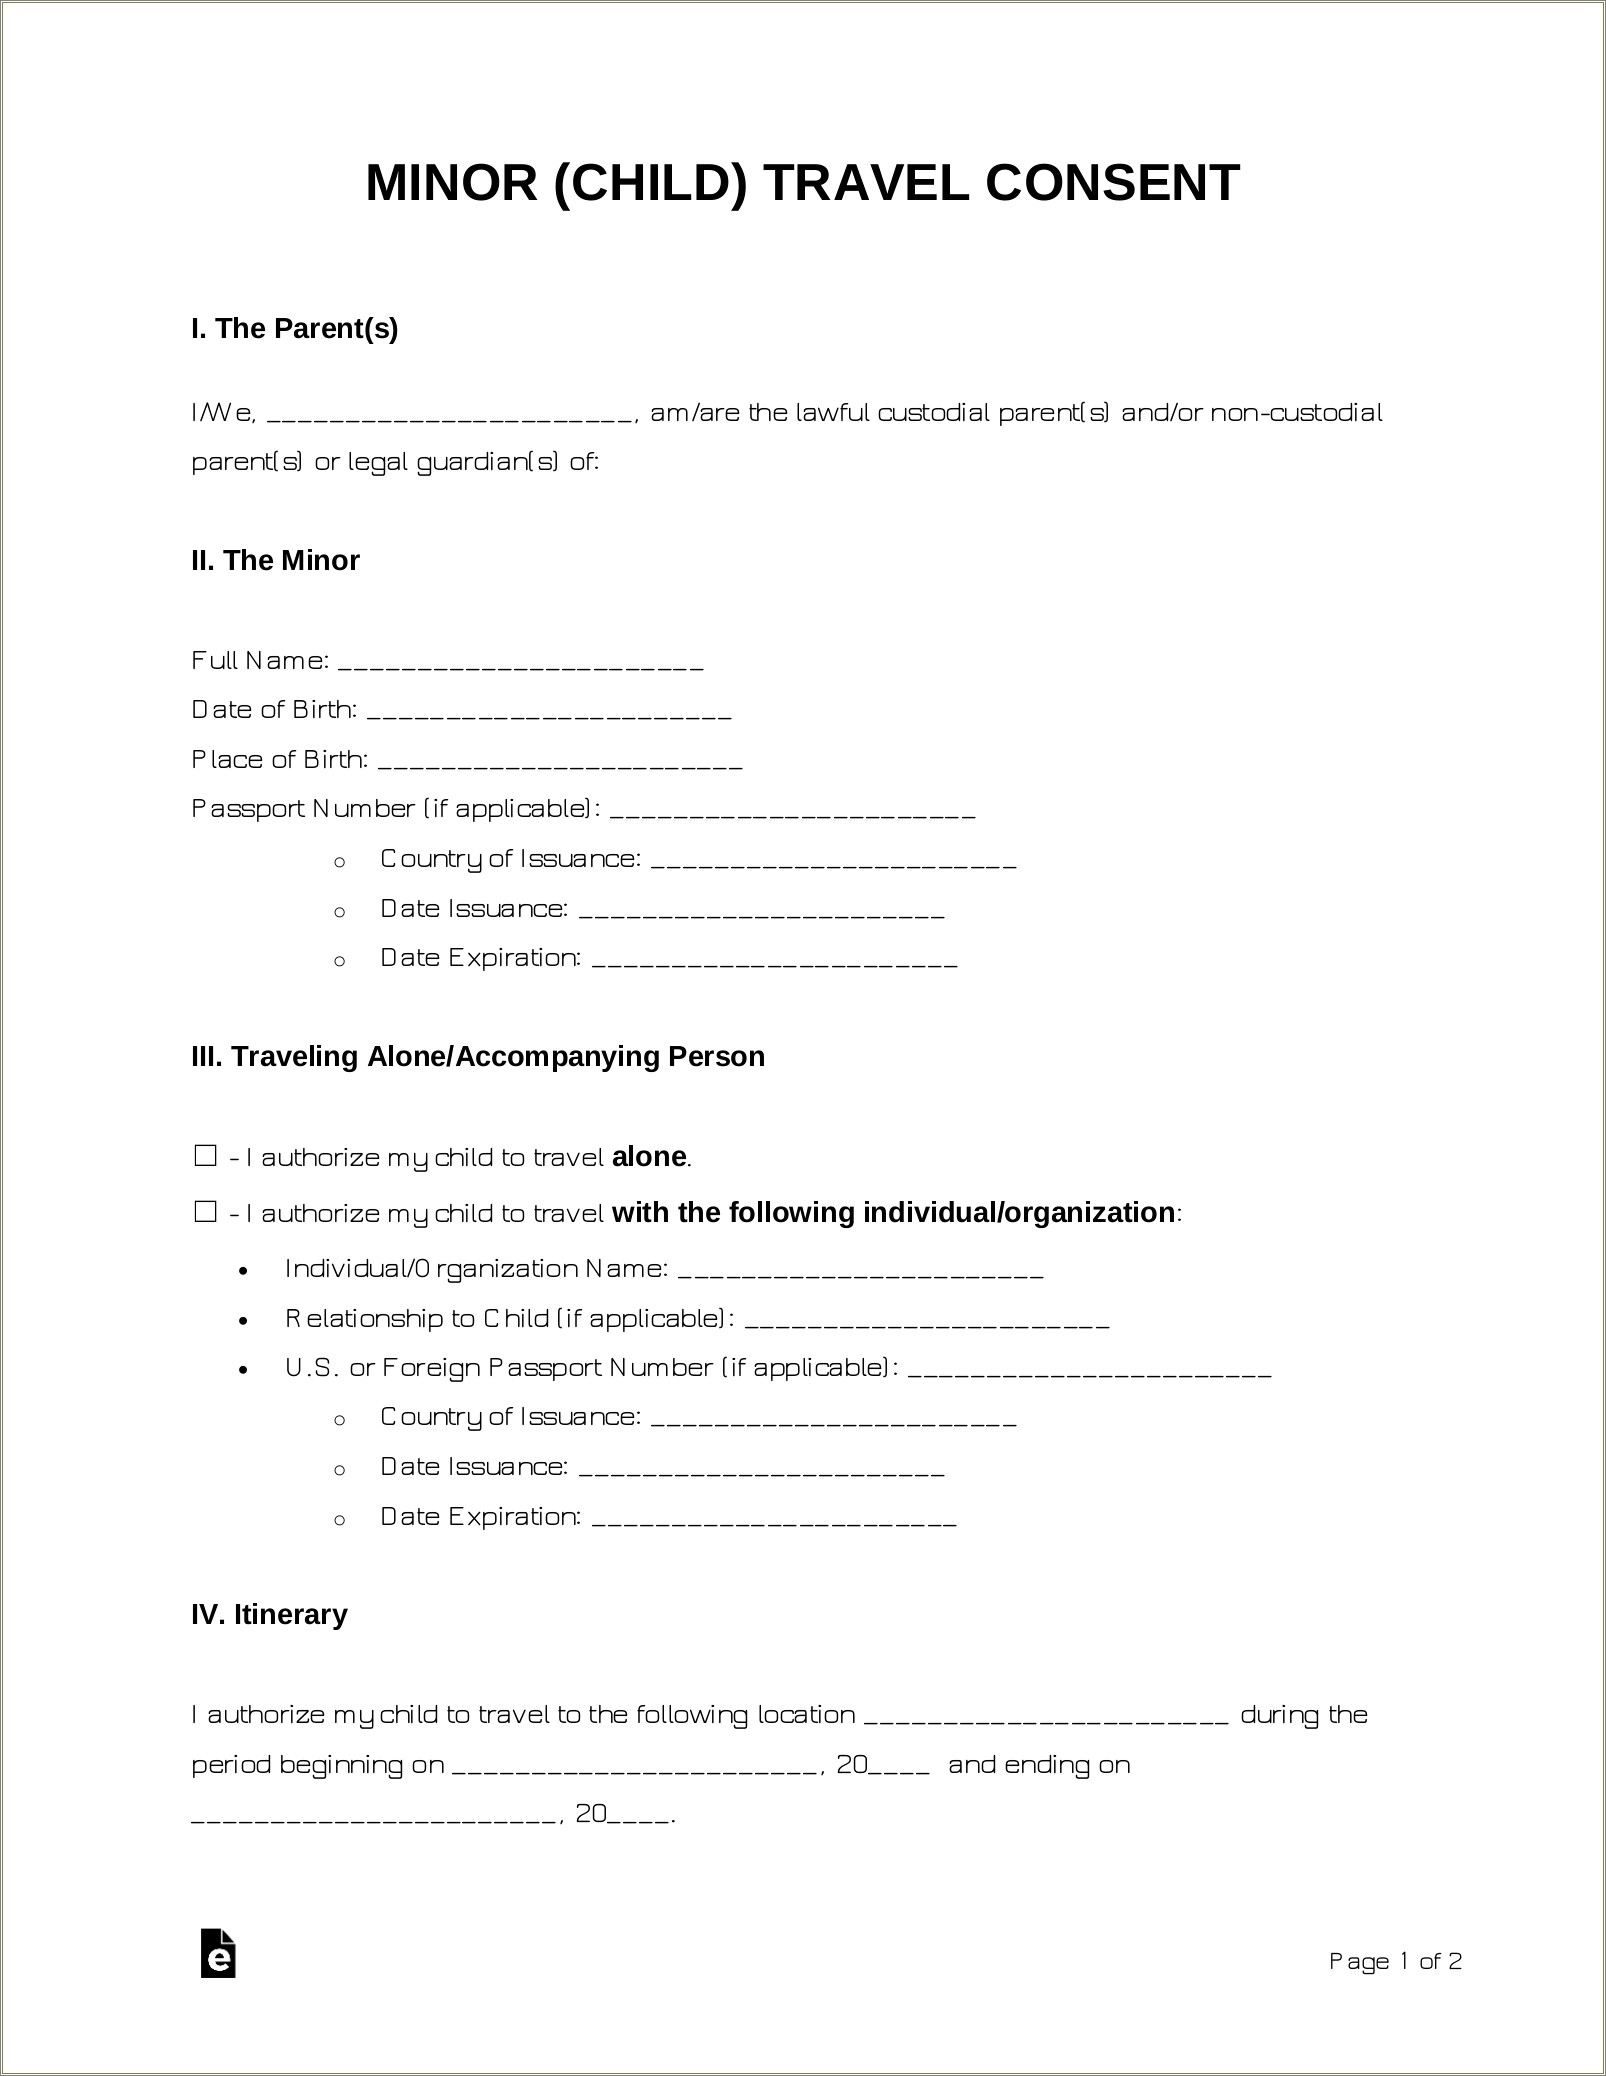 Free Child Travel Consent Form Legal Templates